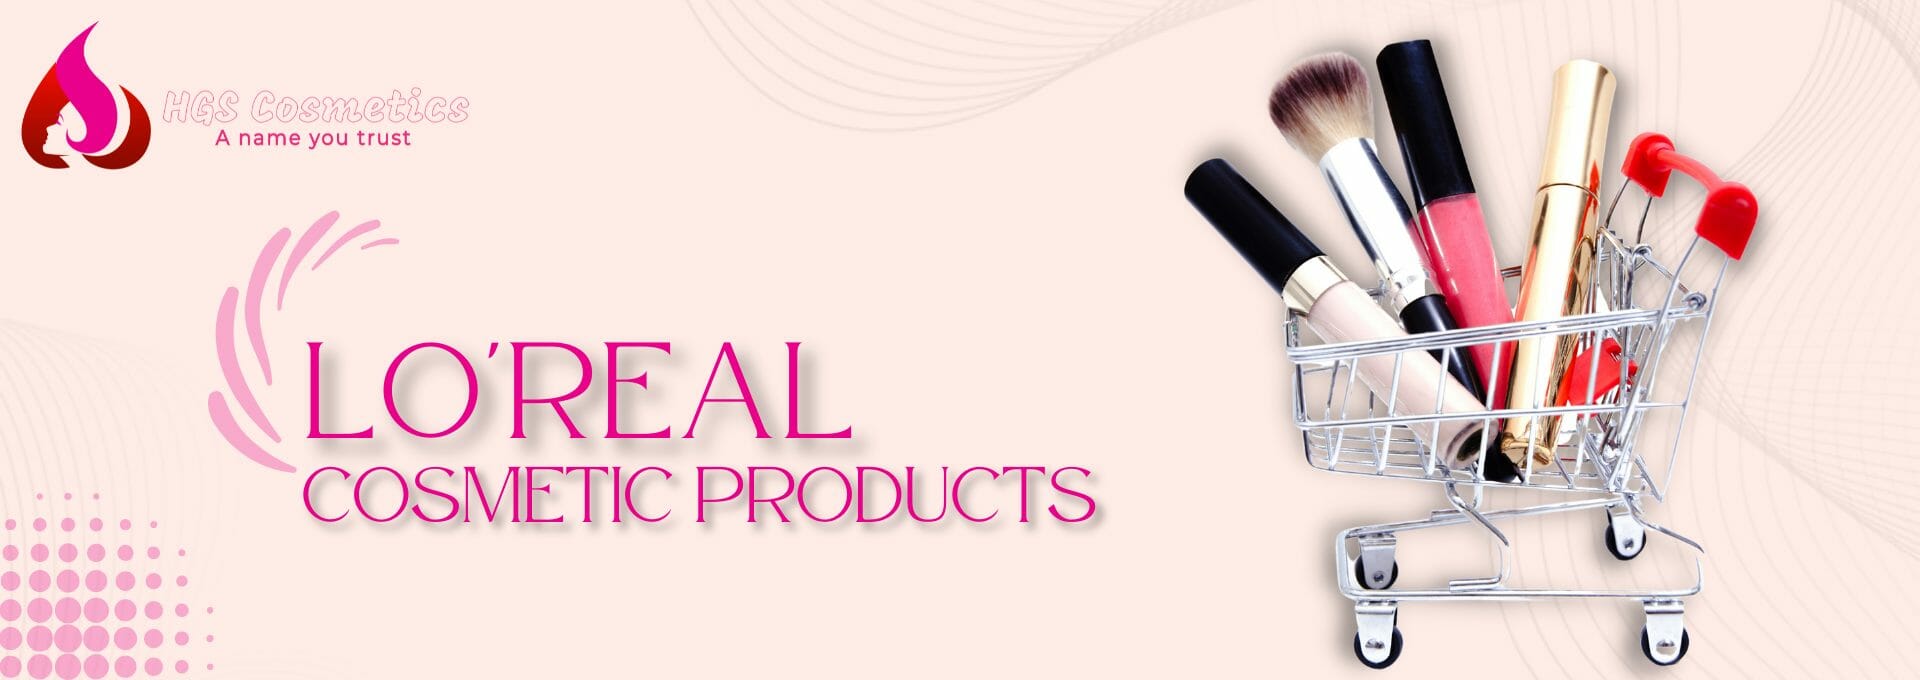 Buy Original Loreal Products Online in Pakistan @ HGS Cosmetics